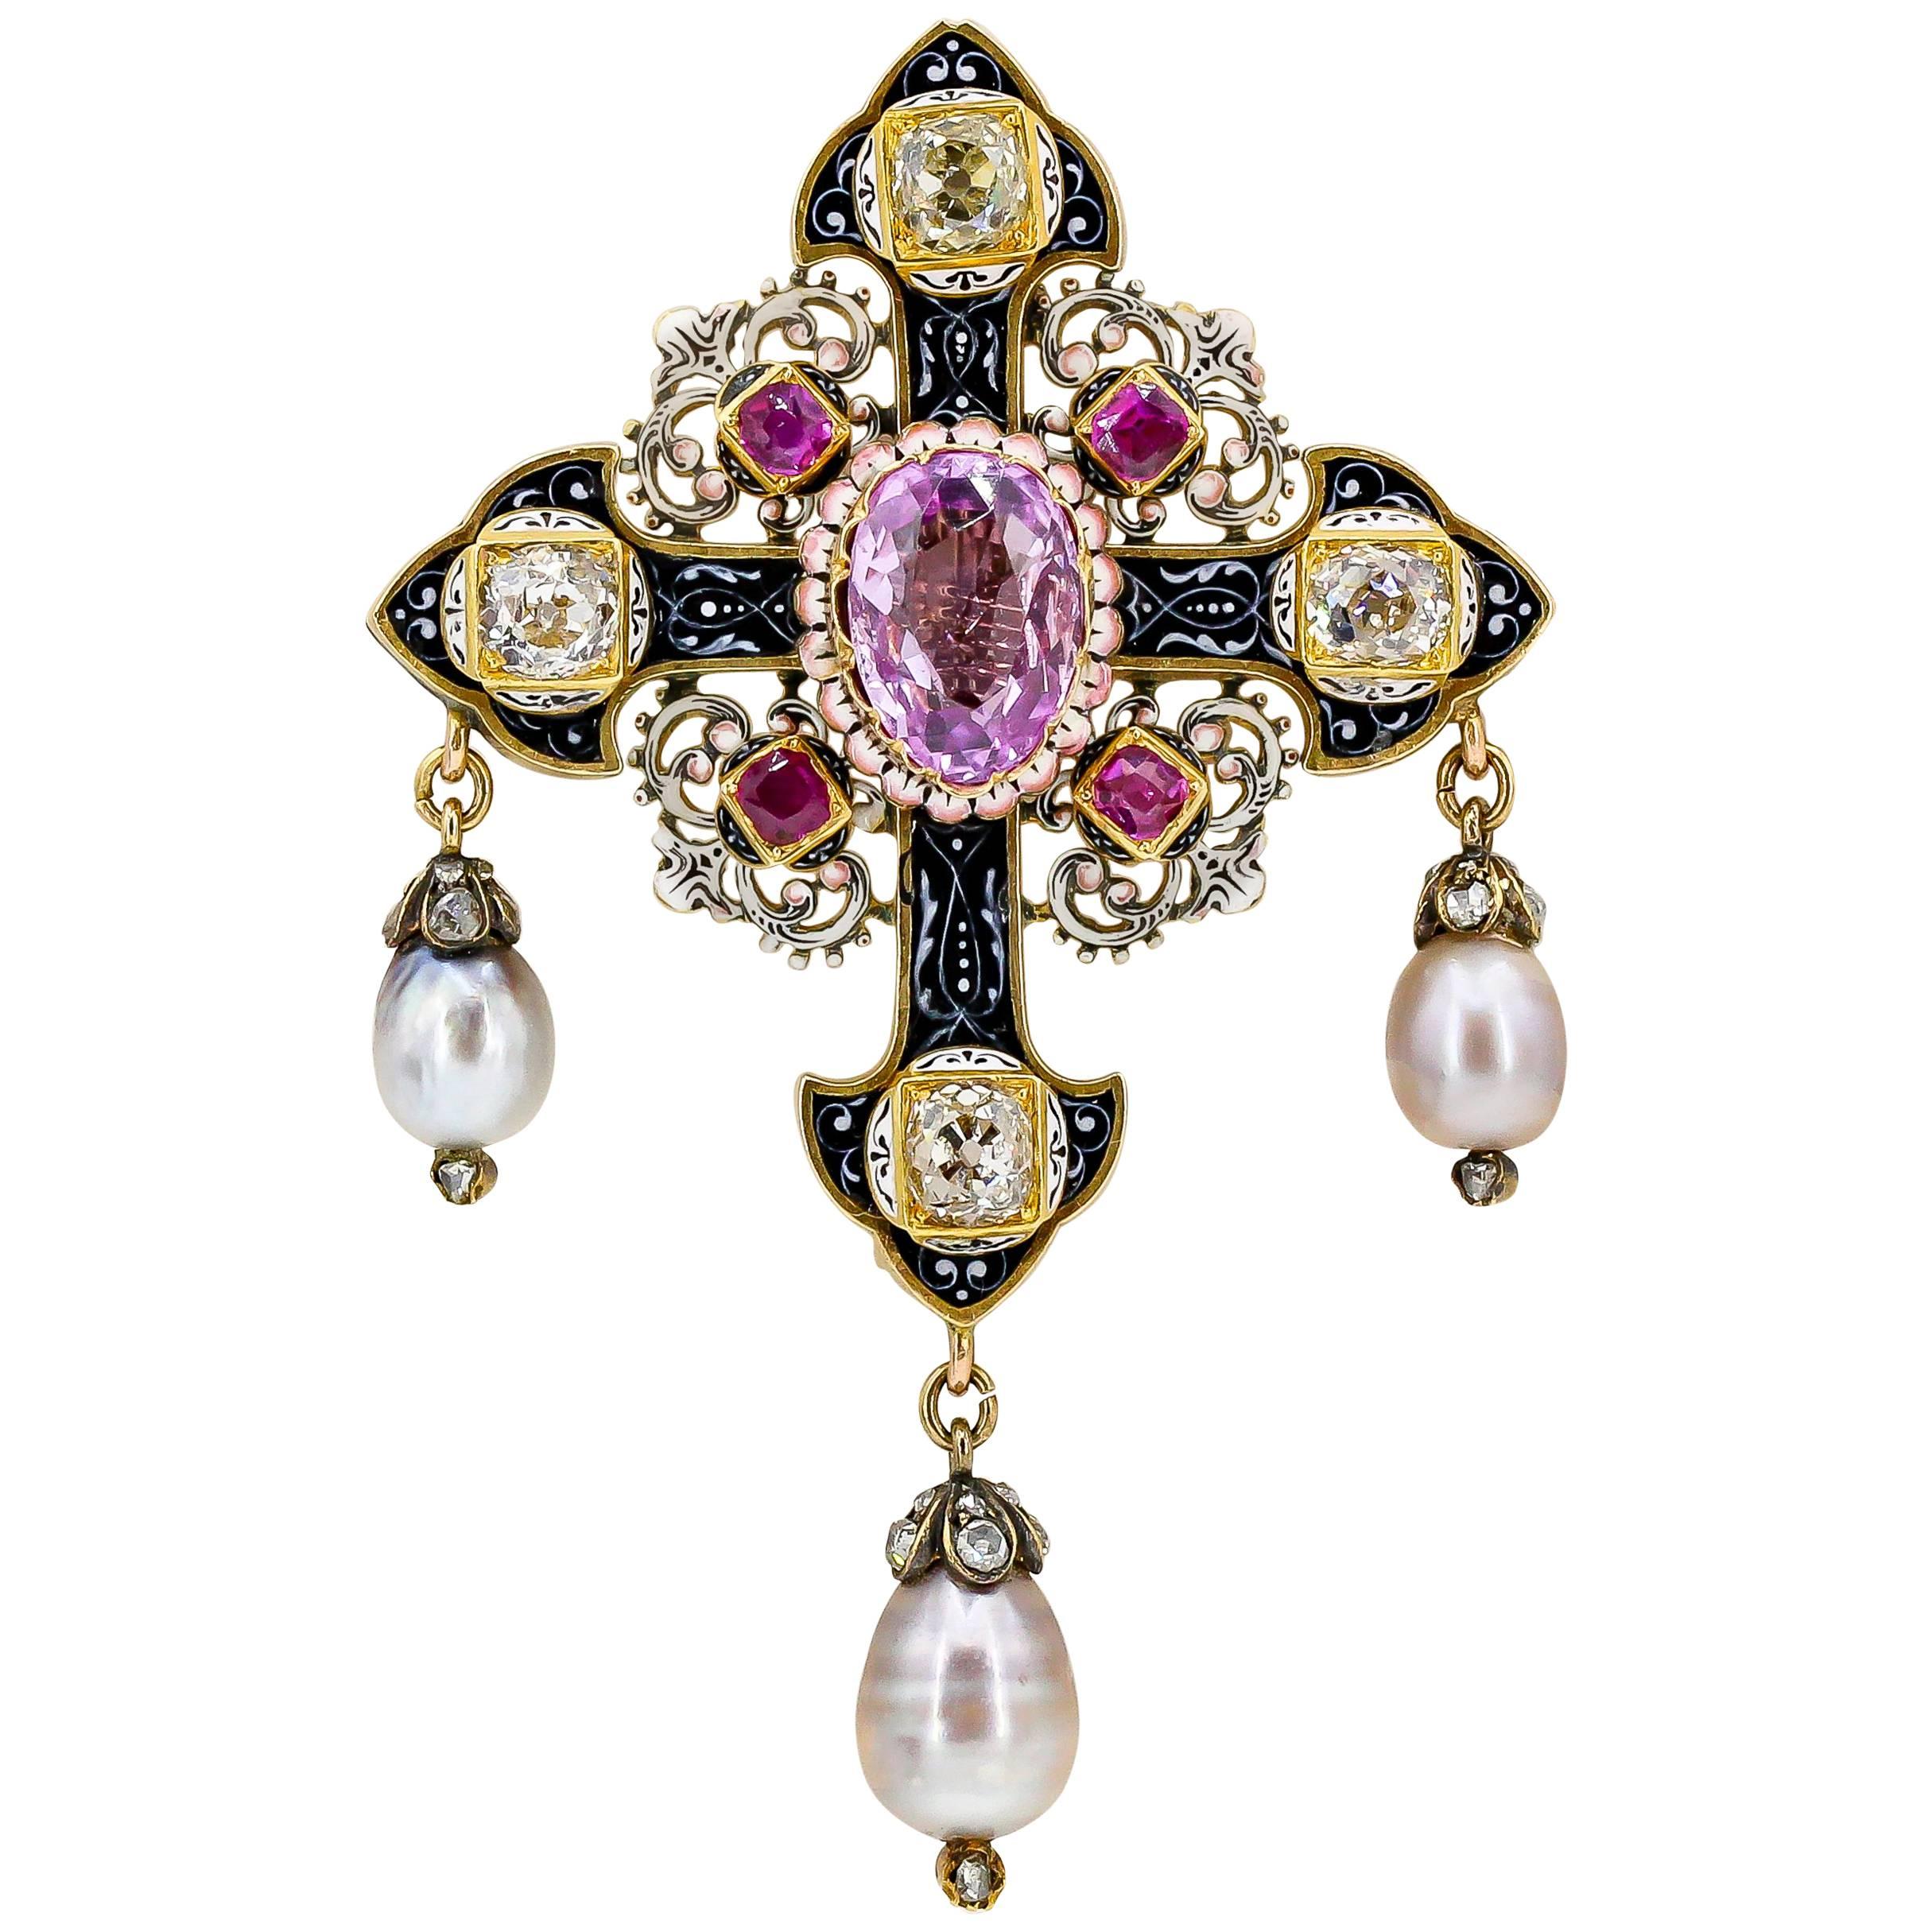 Renaissance Revival Pink Sapphire, Diamond, Natural Pearl and Gold Cross Brooch